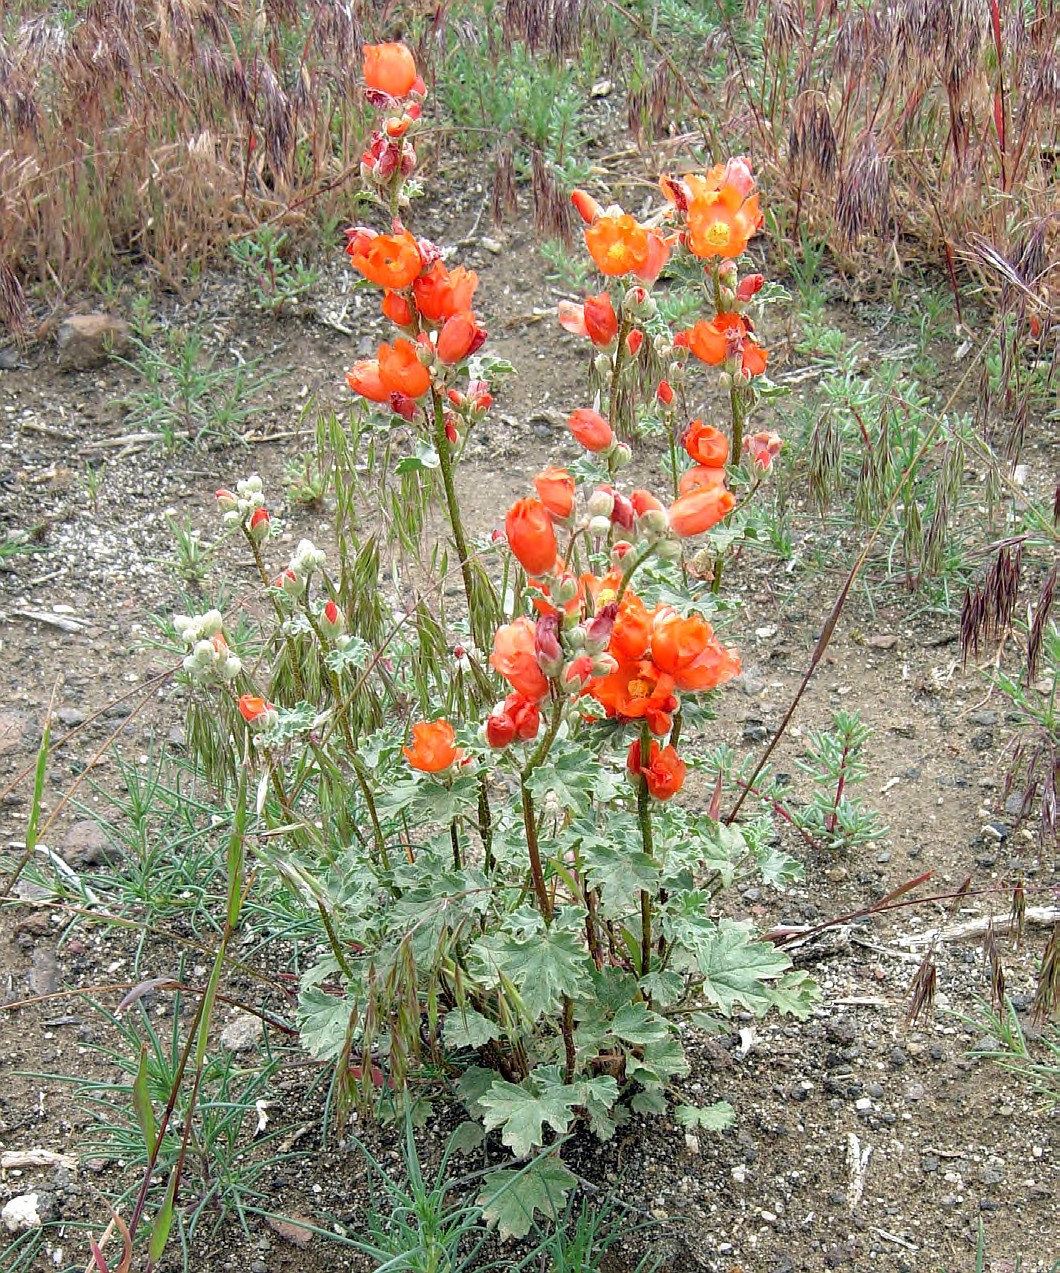 Munro’s globemallow, shown here, is one of the low-water-use plants native to the Columbia Basin. It’s the only orange-colored flower native to the area, according to Dinah Rouleau, project manager with the Columbia Basin Conservation District.